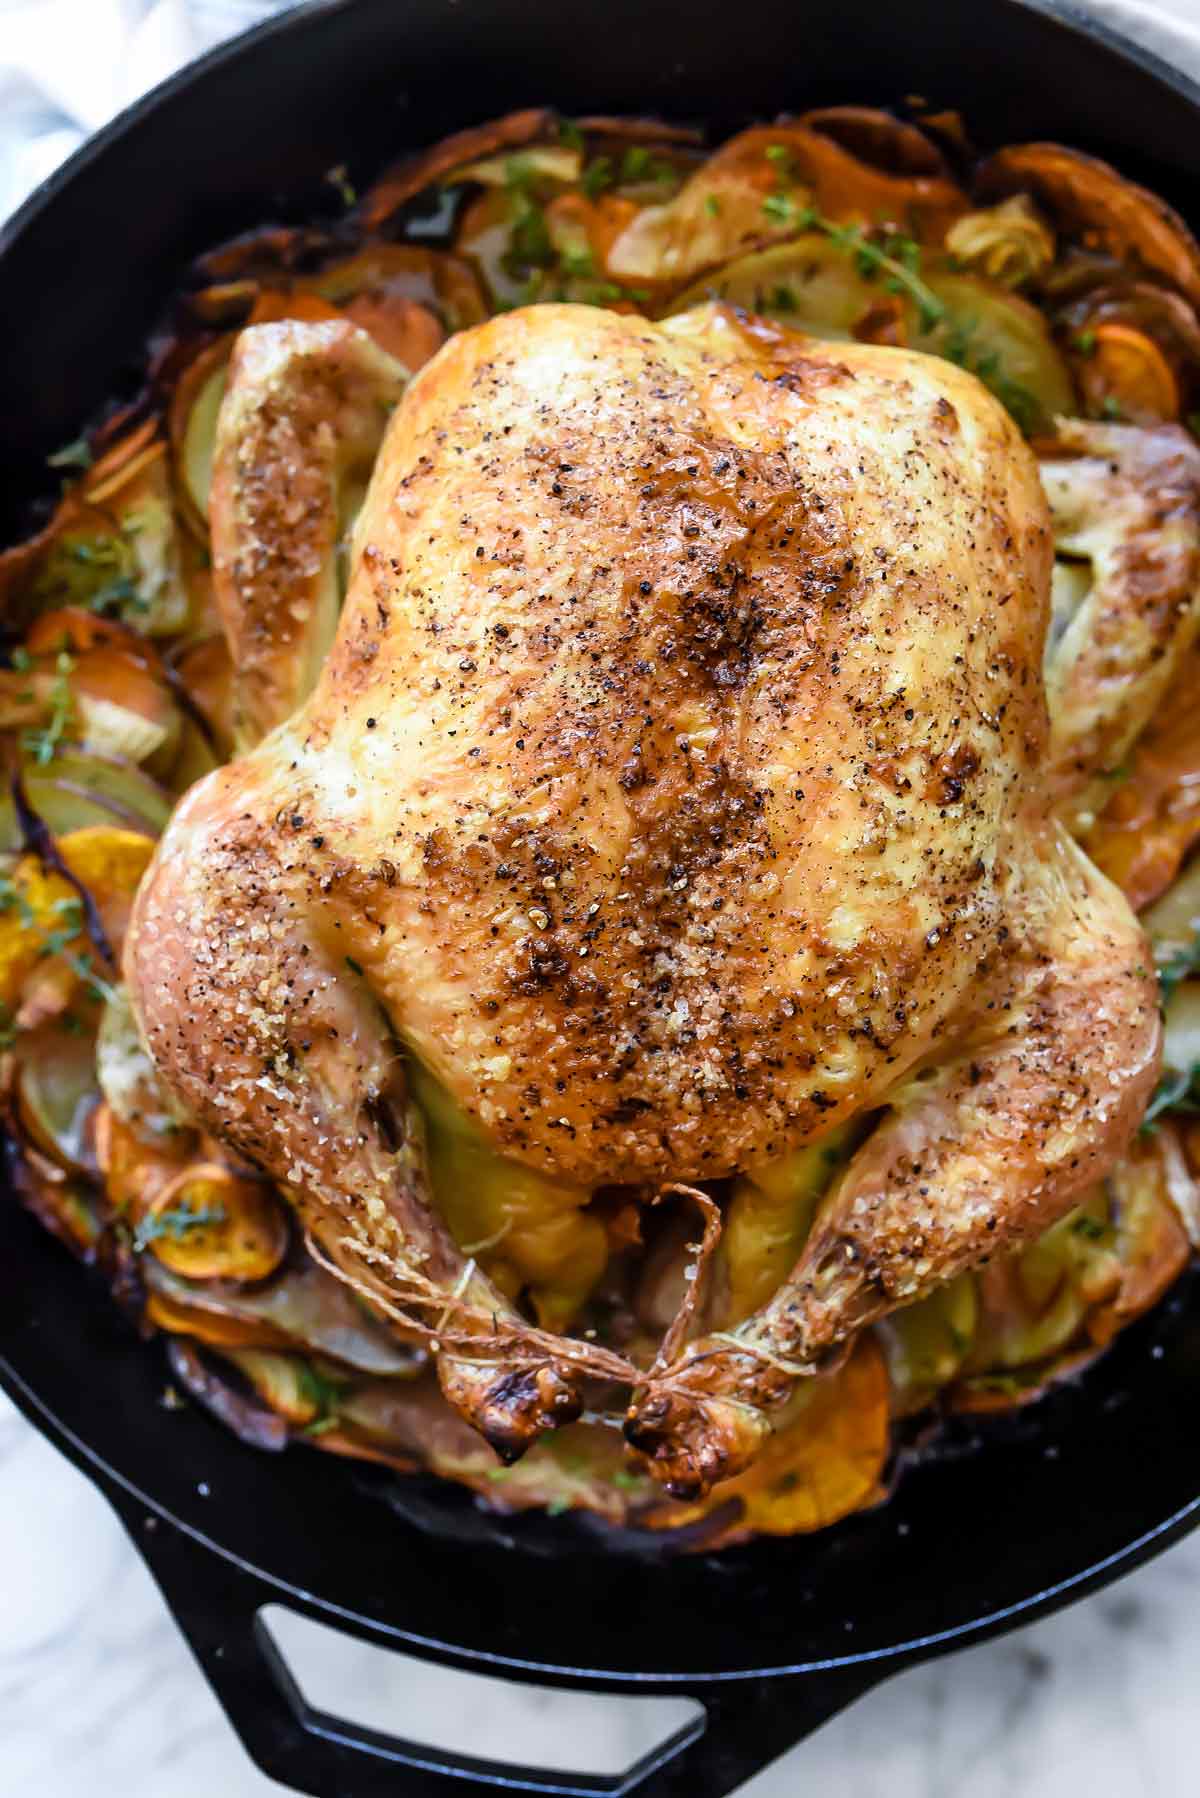 Cast Iron Skillet Roasted Chicken With Potatoes Foodiecrush Com,Granite Top Kitchen Island On Wheels